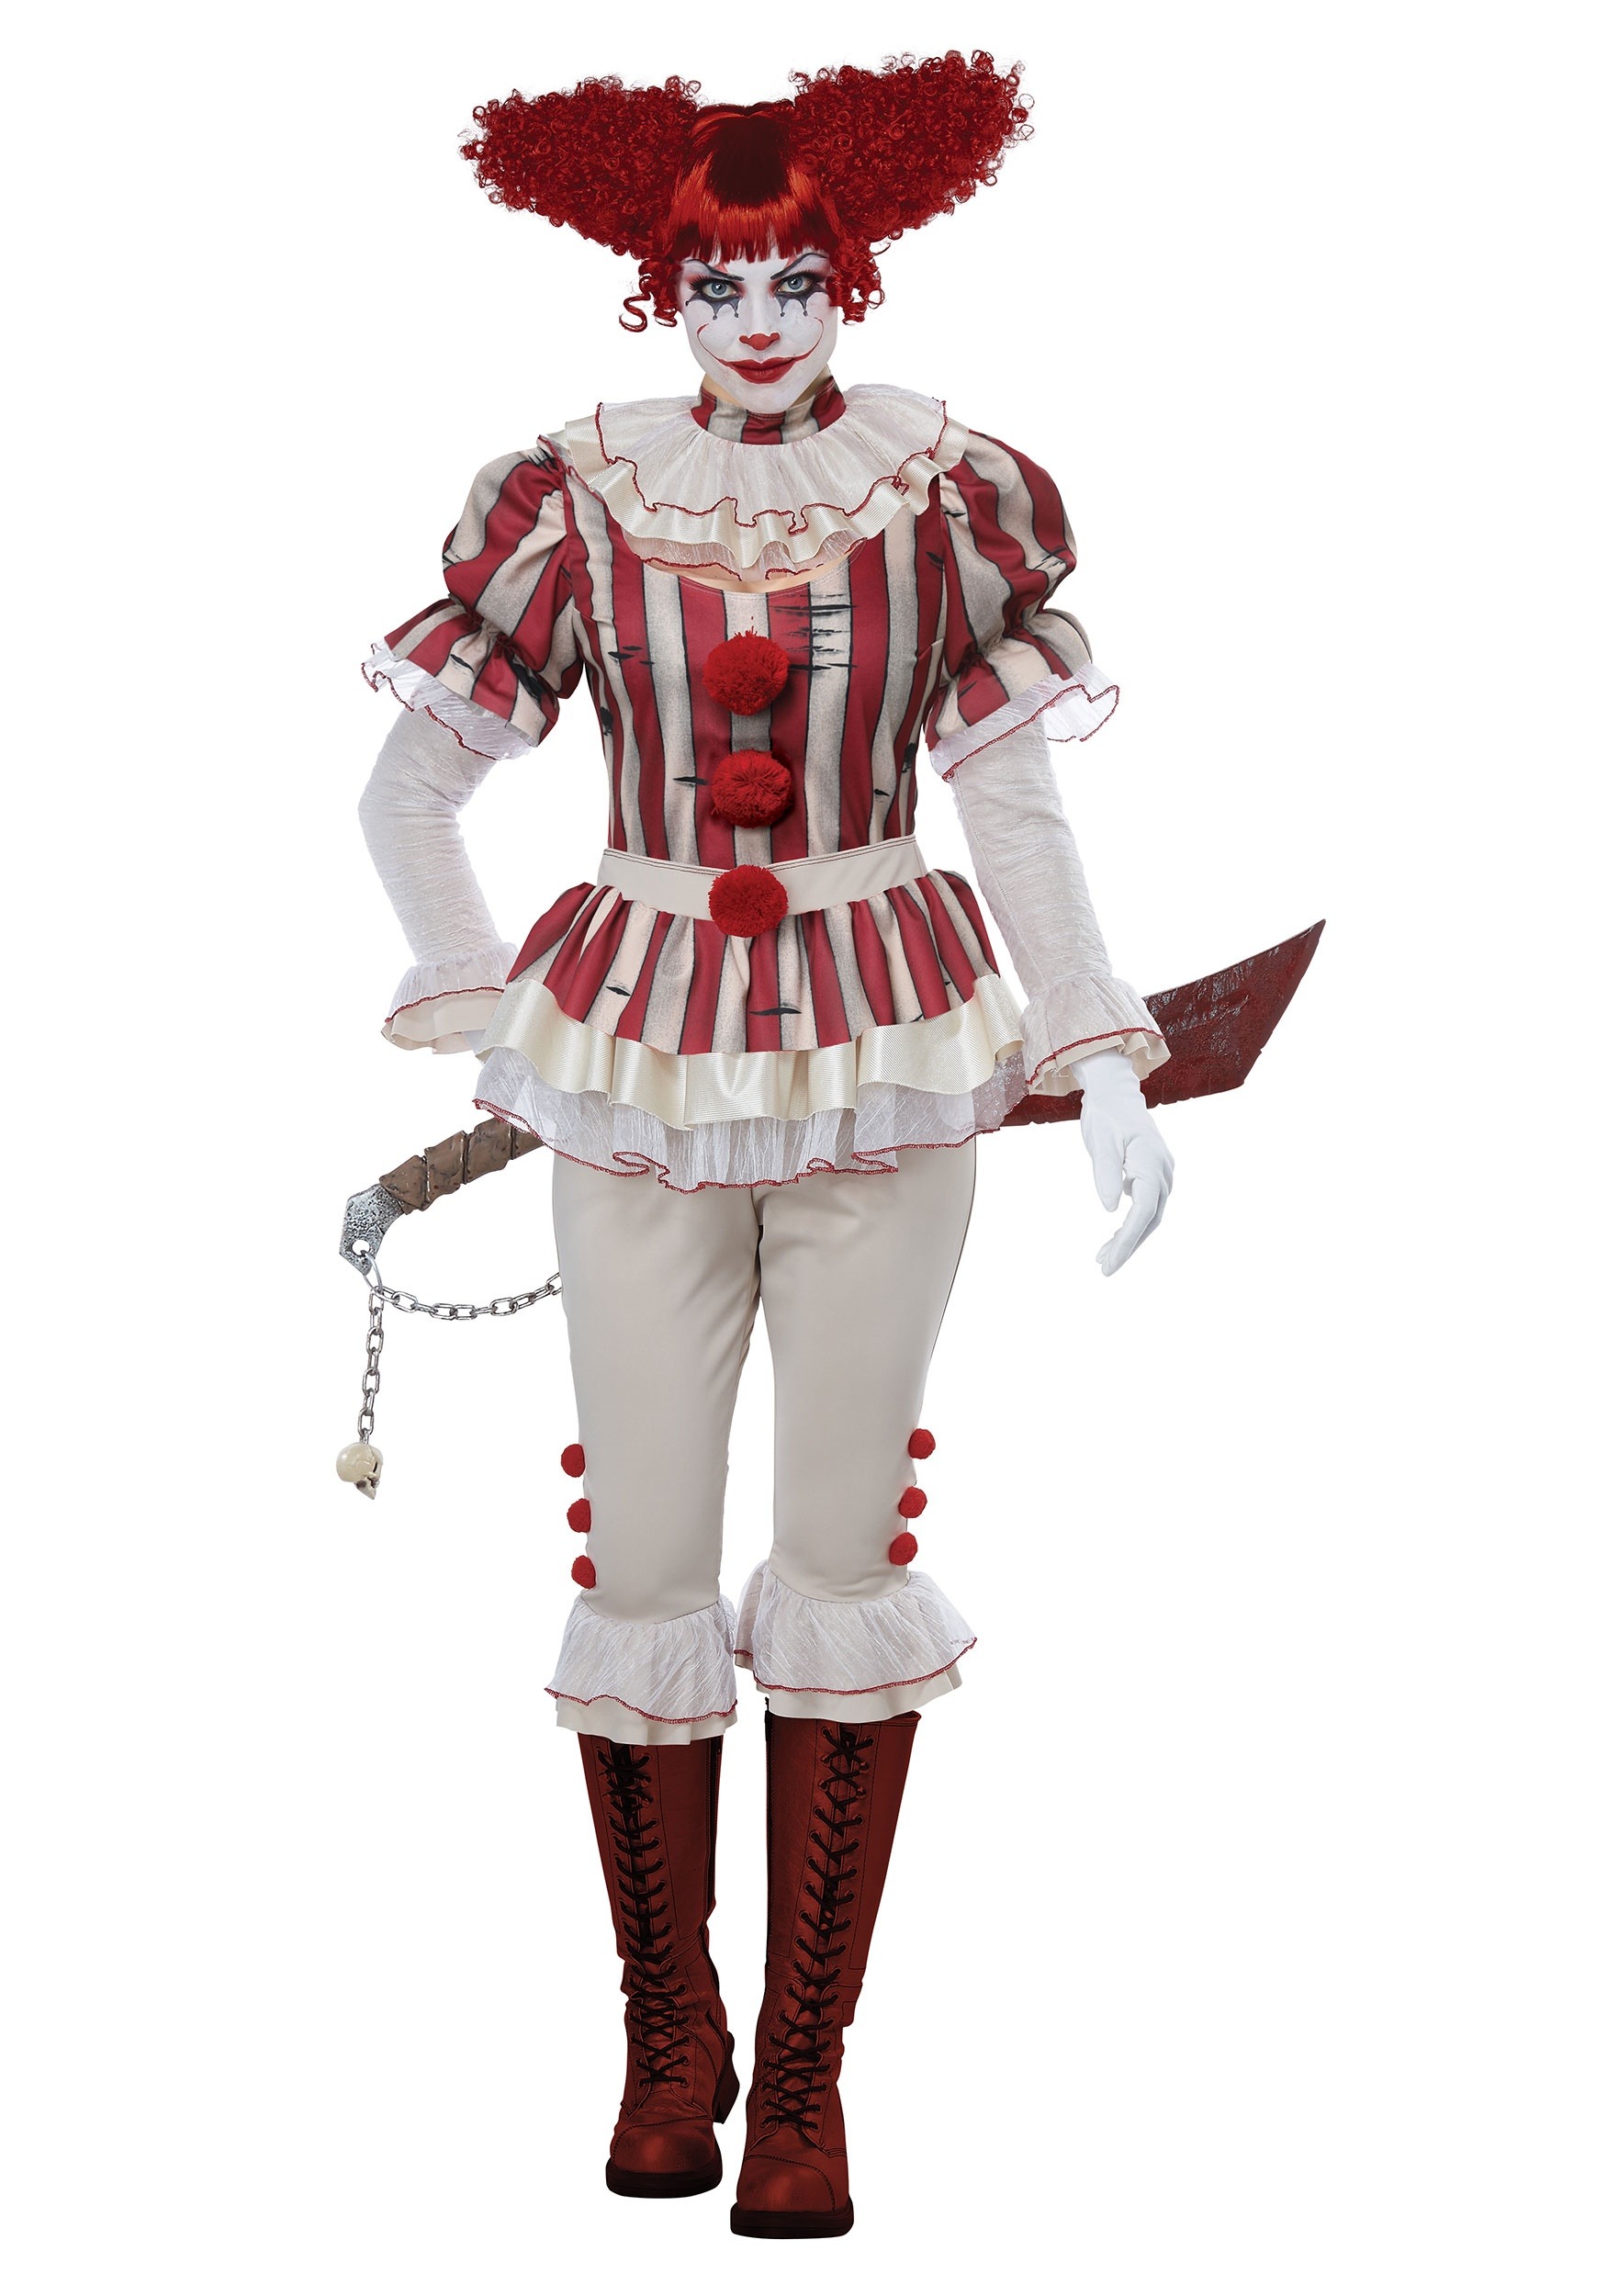 Photos - Fancy Dress California Costume Collection Sadistic Clown Women's Costume Red/White 